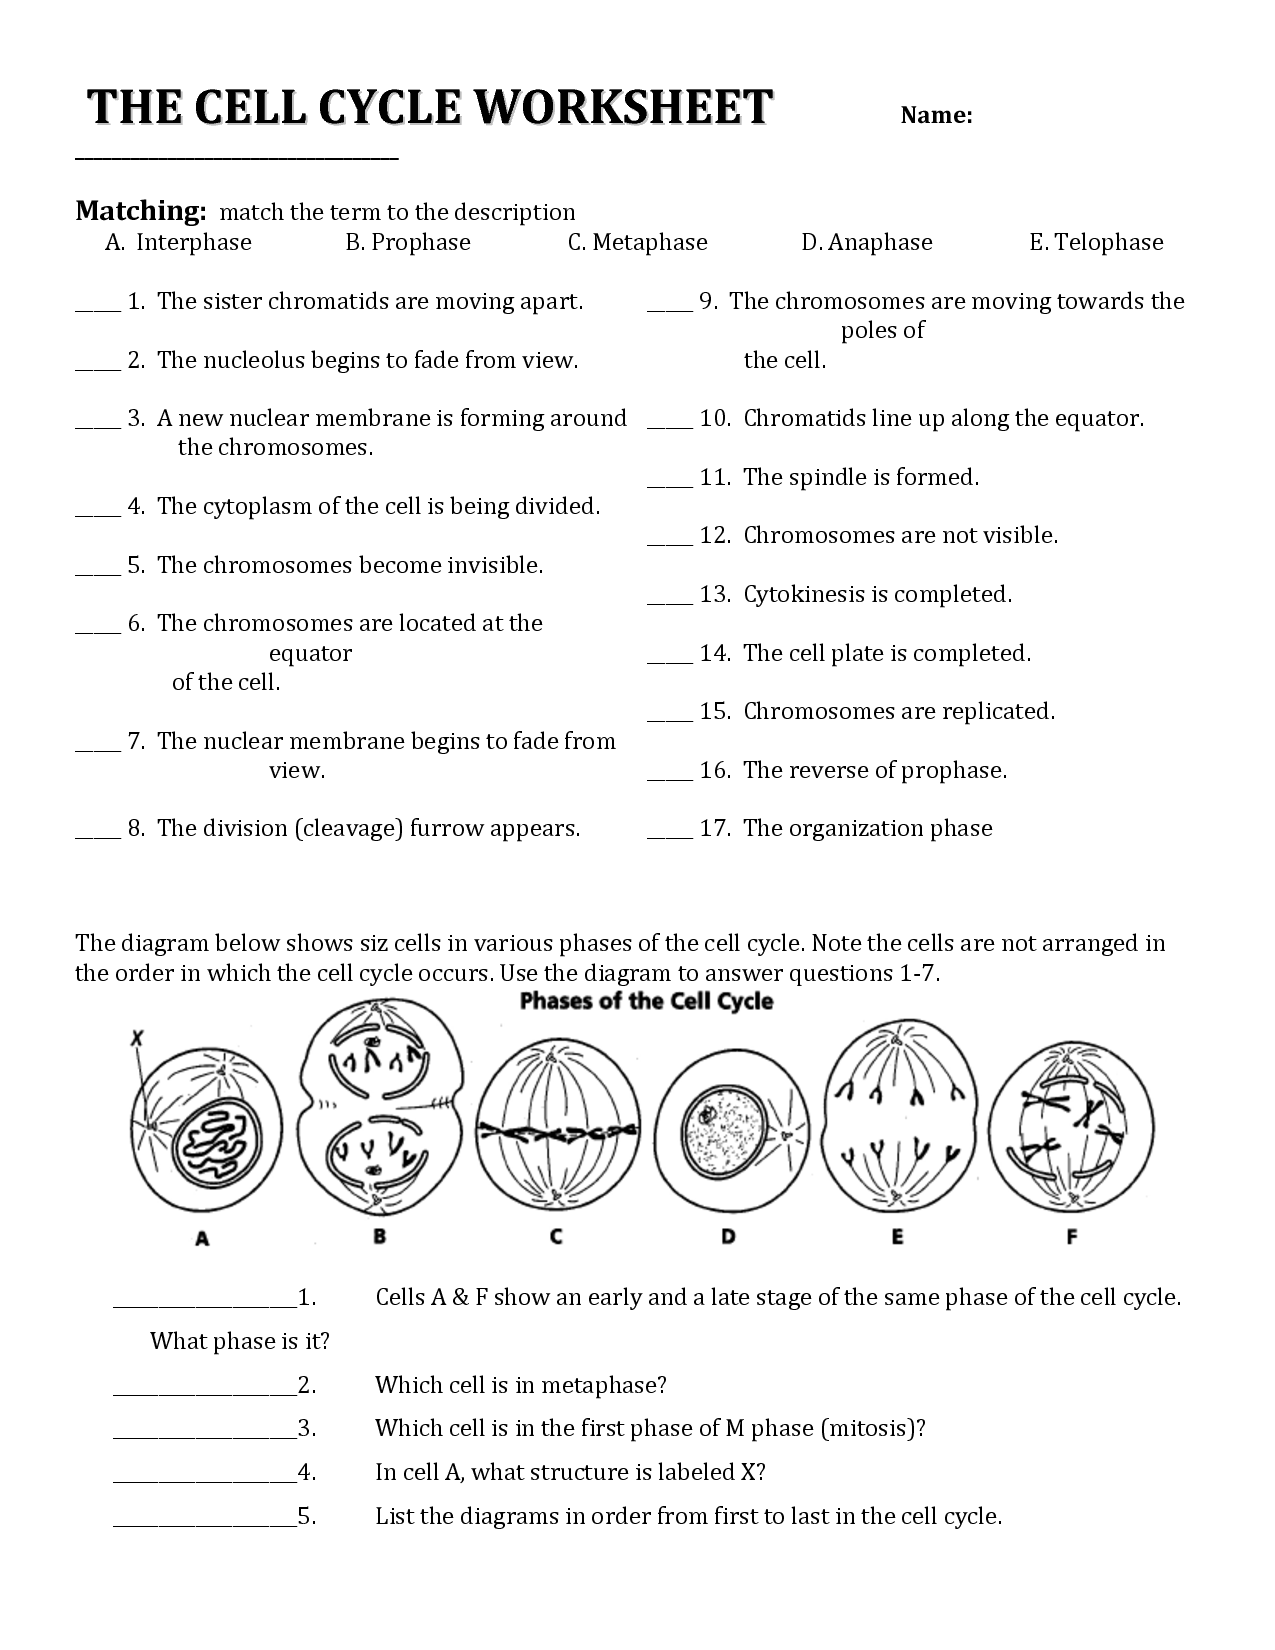 The Eukaryotic Cell Cycle And Cancer Worksheet Answers